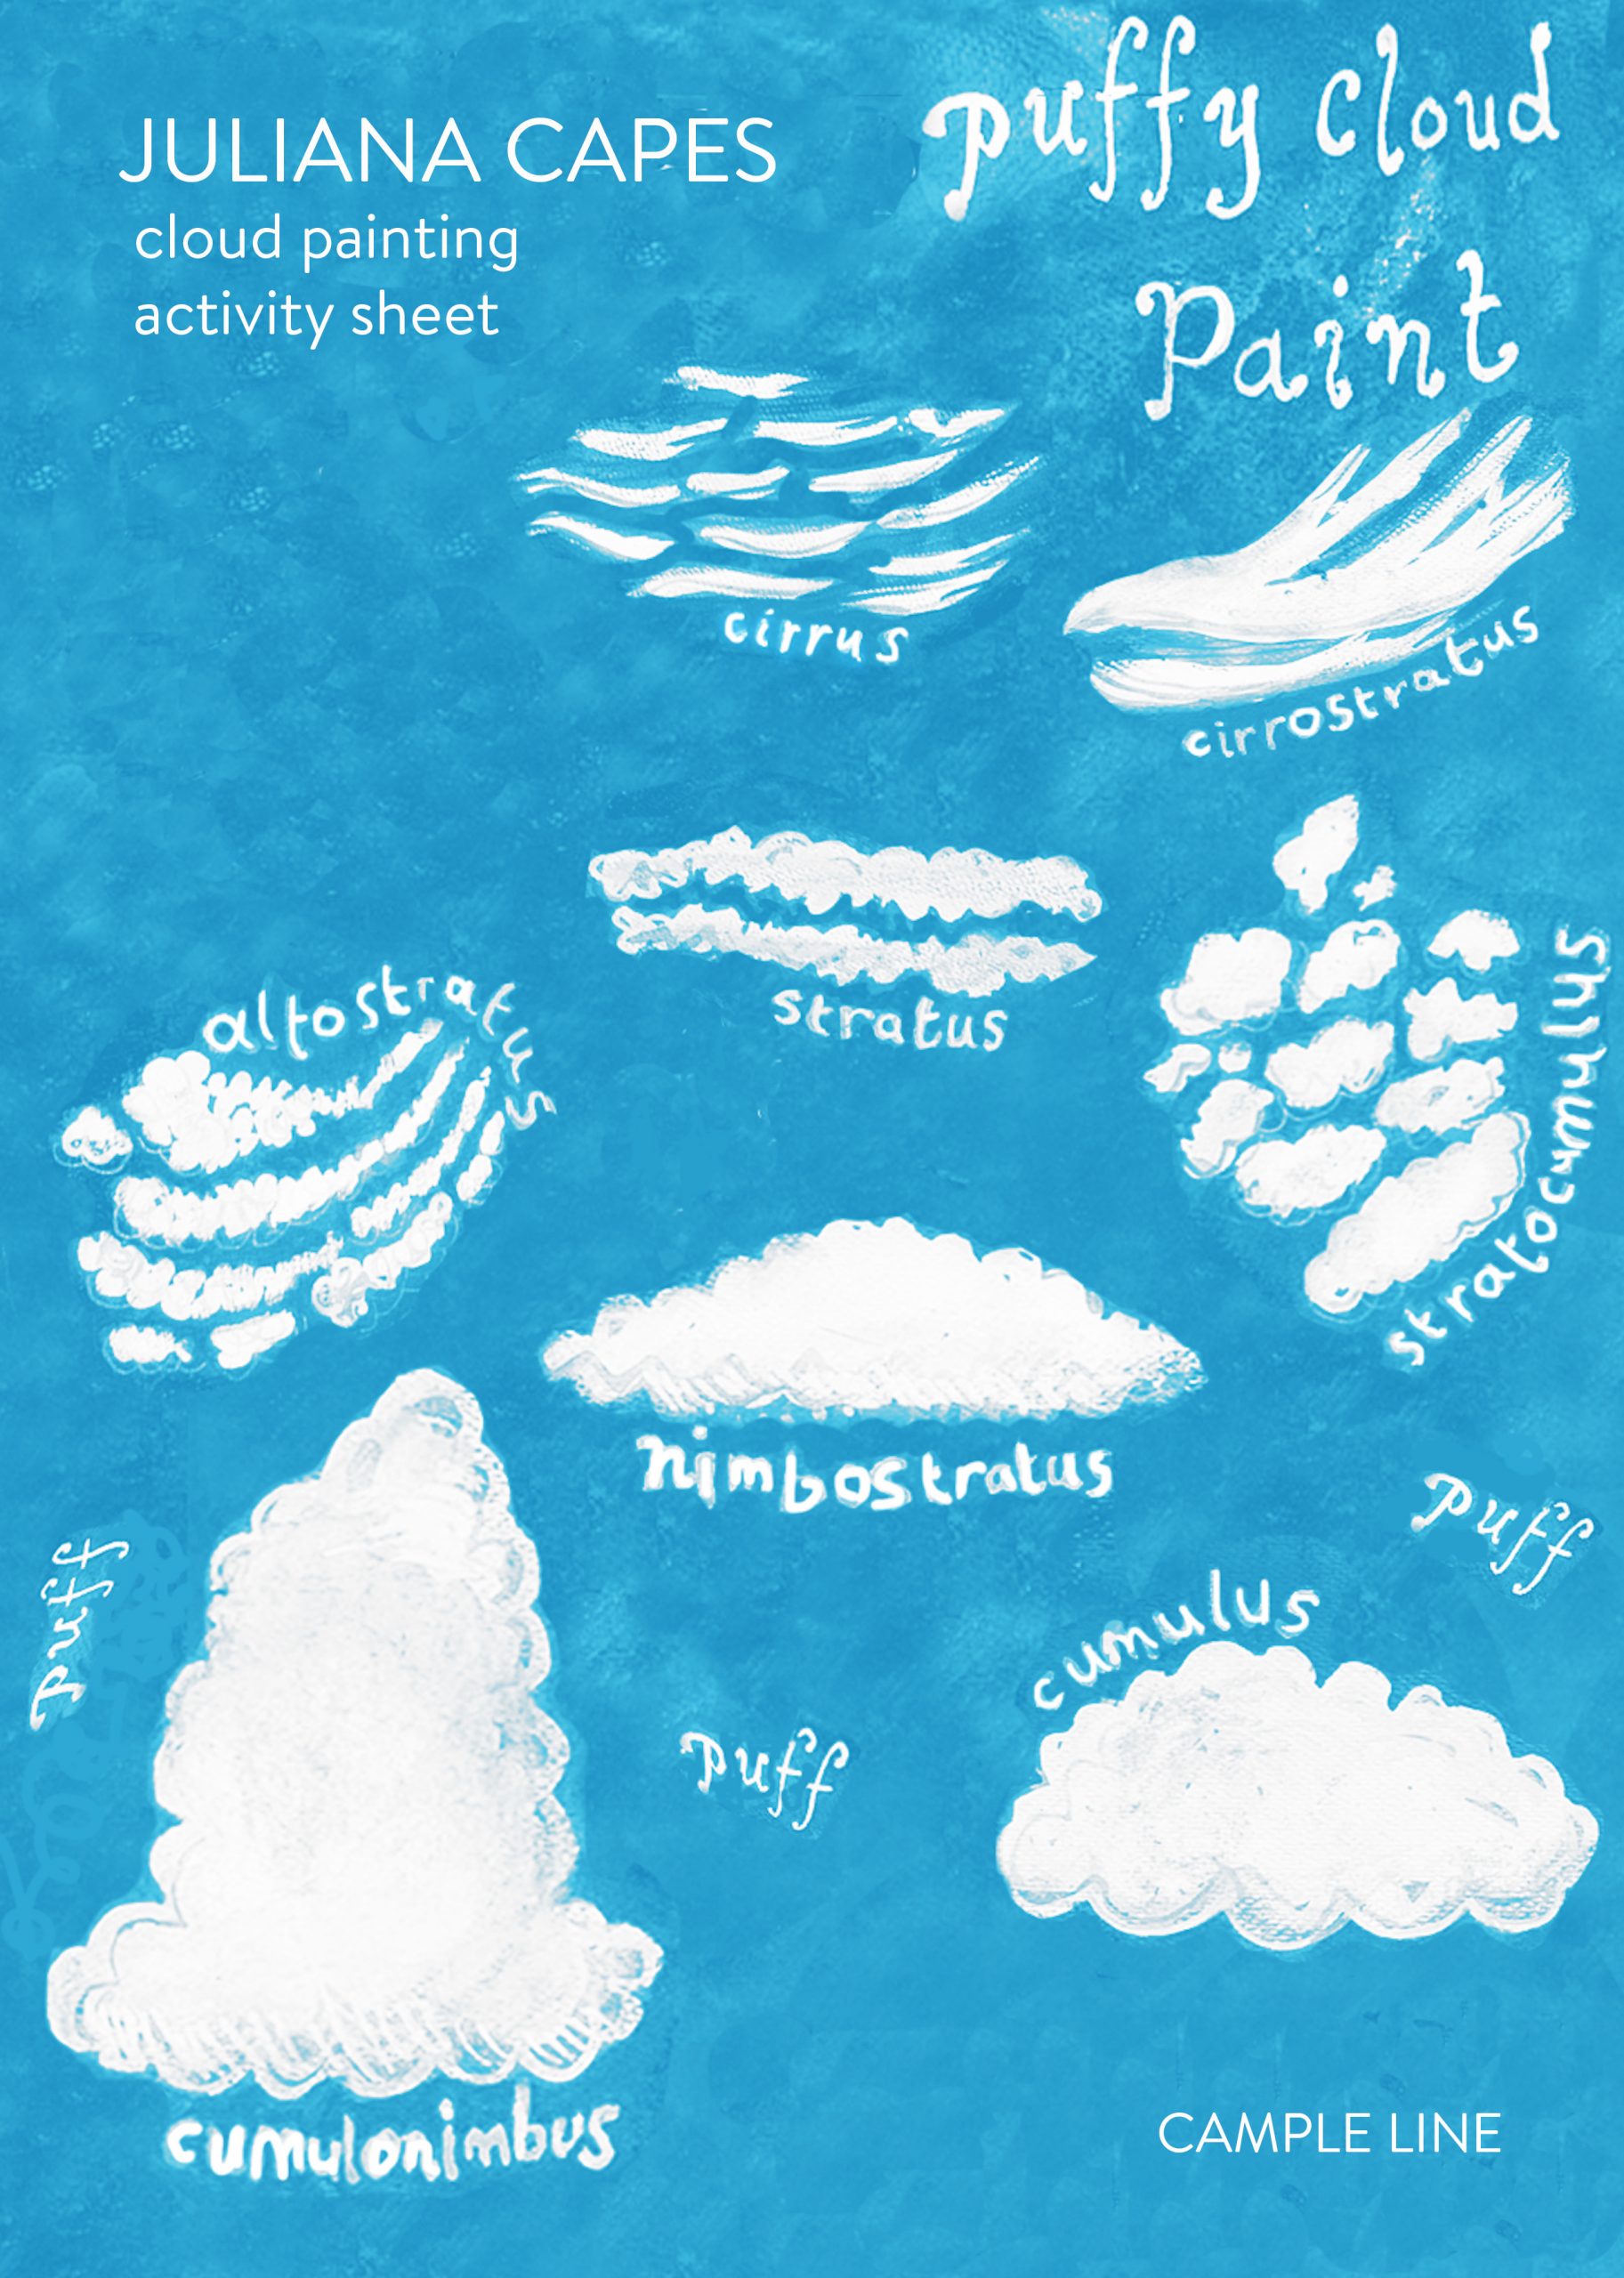 A mottled sky blue page with 8 different cloud shapes painted white, ranging from small and wispy to big and puffy. White text in the top left corner reads "JULIANA CAPES cloud painting activity sheet". In the top left, swirly hand-painted text reads "puffy cloud paint". Around each cloud, hand-painted text defines each cloud type, namely "cirrus", "cirrostratus", "stratus", "altostratus", "stratocumulus", "nimbostratus", "cumulus" and "cumulonimbus". There are also 3 hand-painted words that read "puff" dotted around the page. In the bottom right corner, white text reads "CAMPLE LINE".